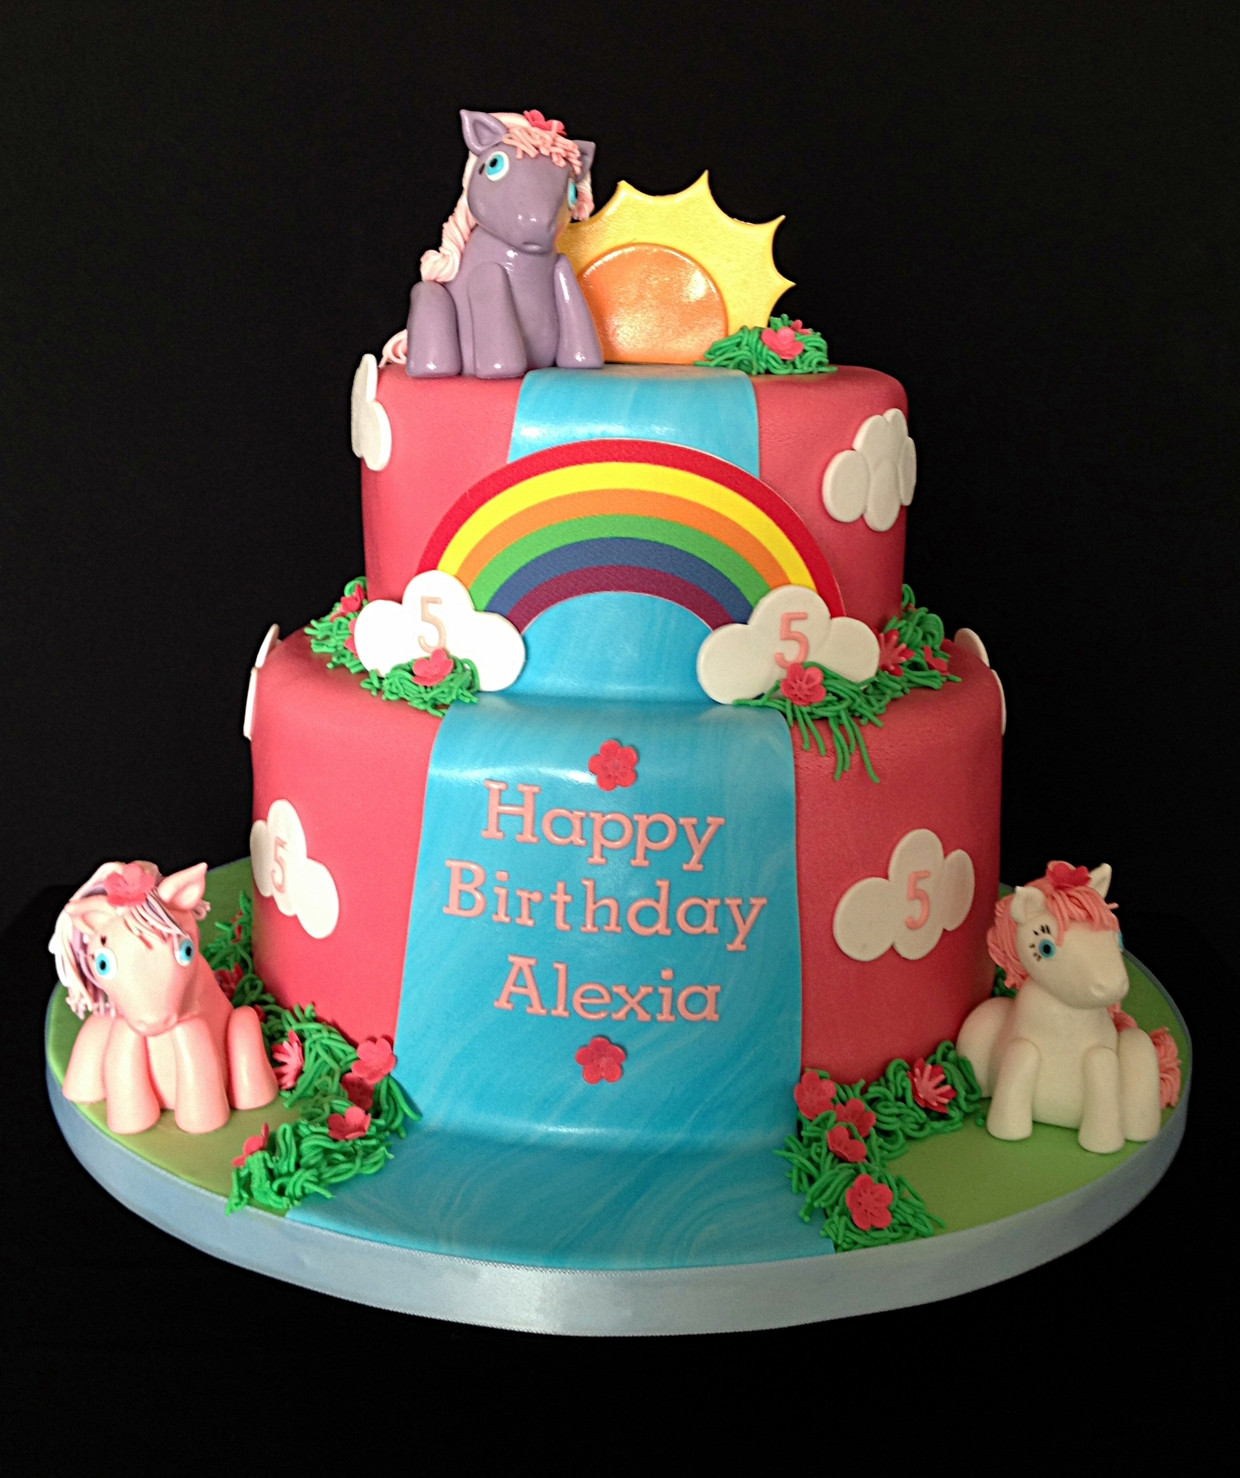 Walmart Custom Birthday Cakes
 Home Tips Kids Will Have A Fun With Walmart Cake Designs